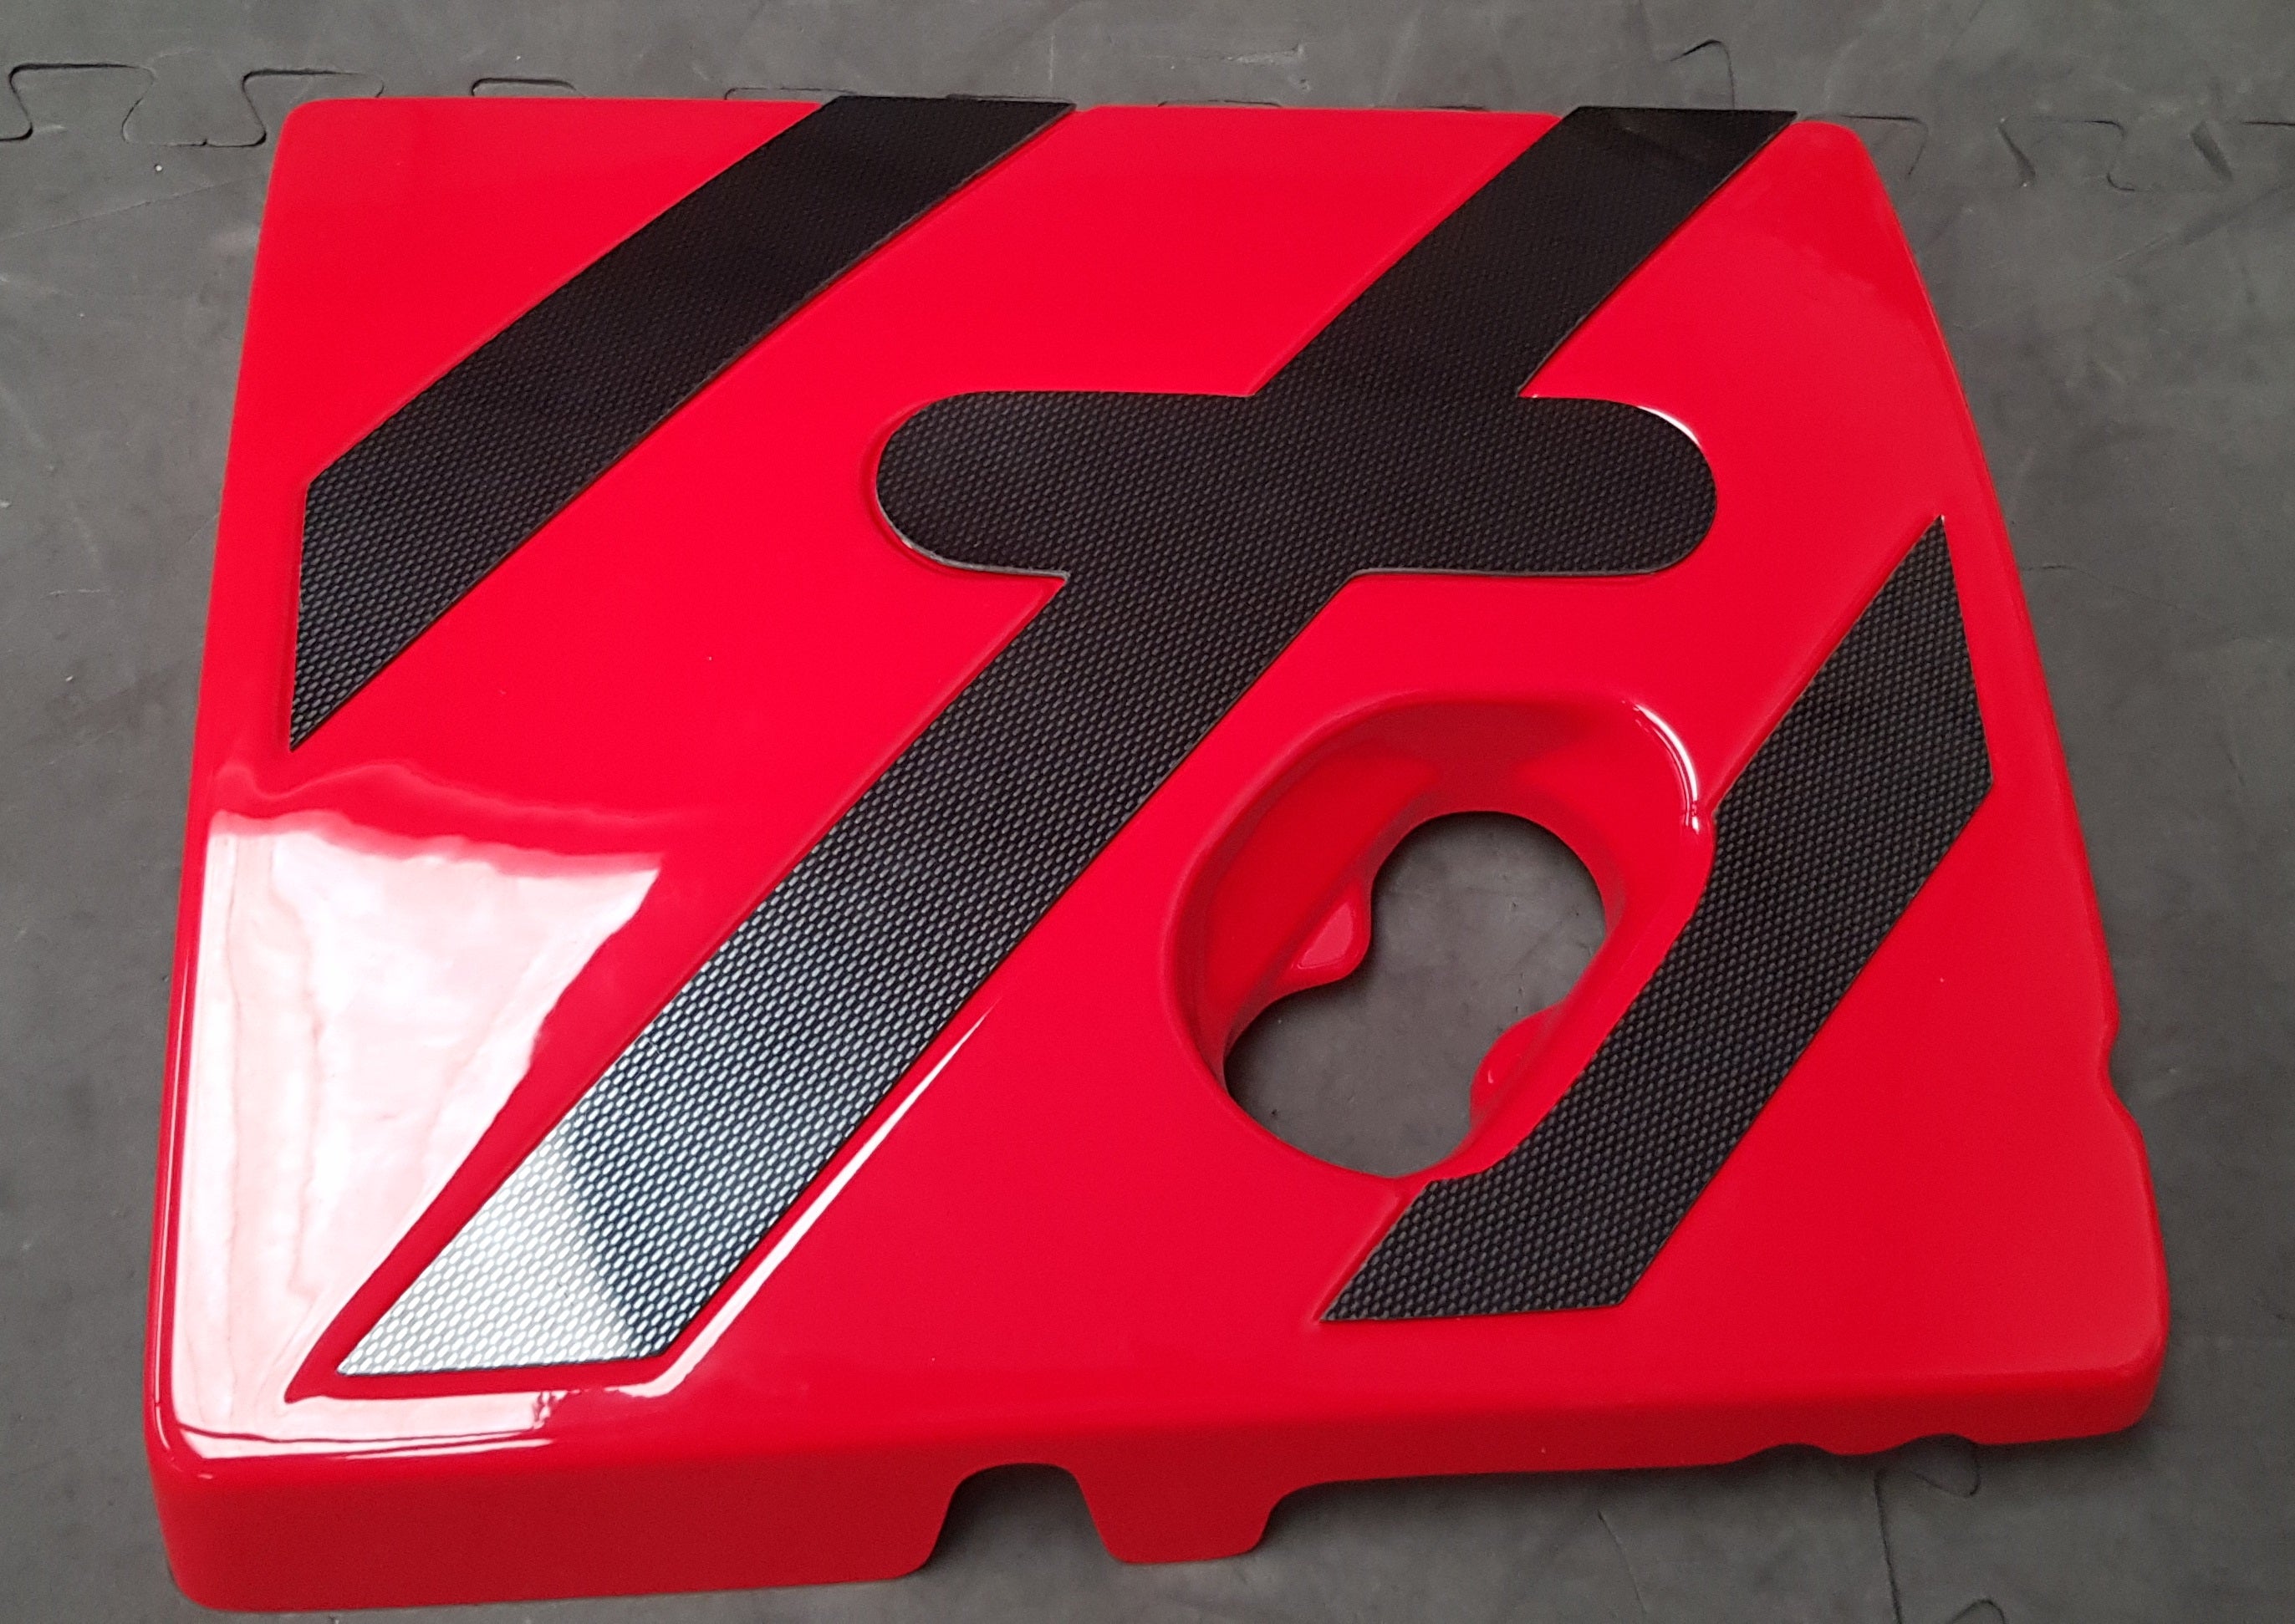 Proform Engine Cover - MK8/8.5 Fiesta ST / Mk2 Puma ST - (Painted Finishes)